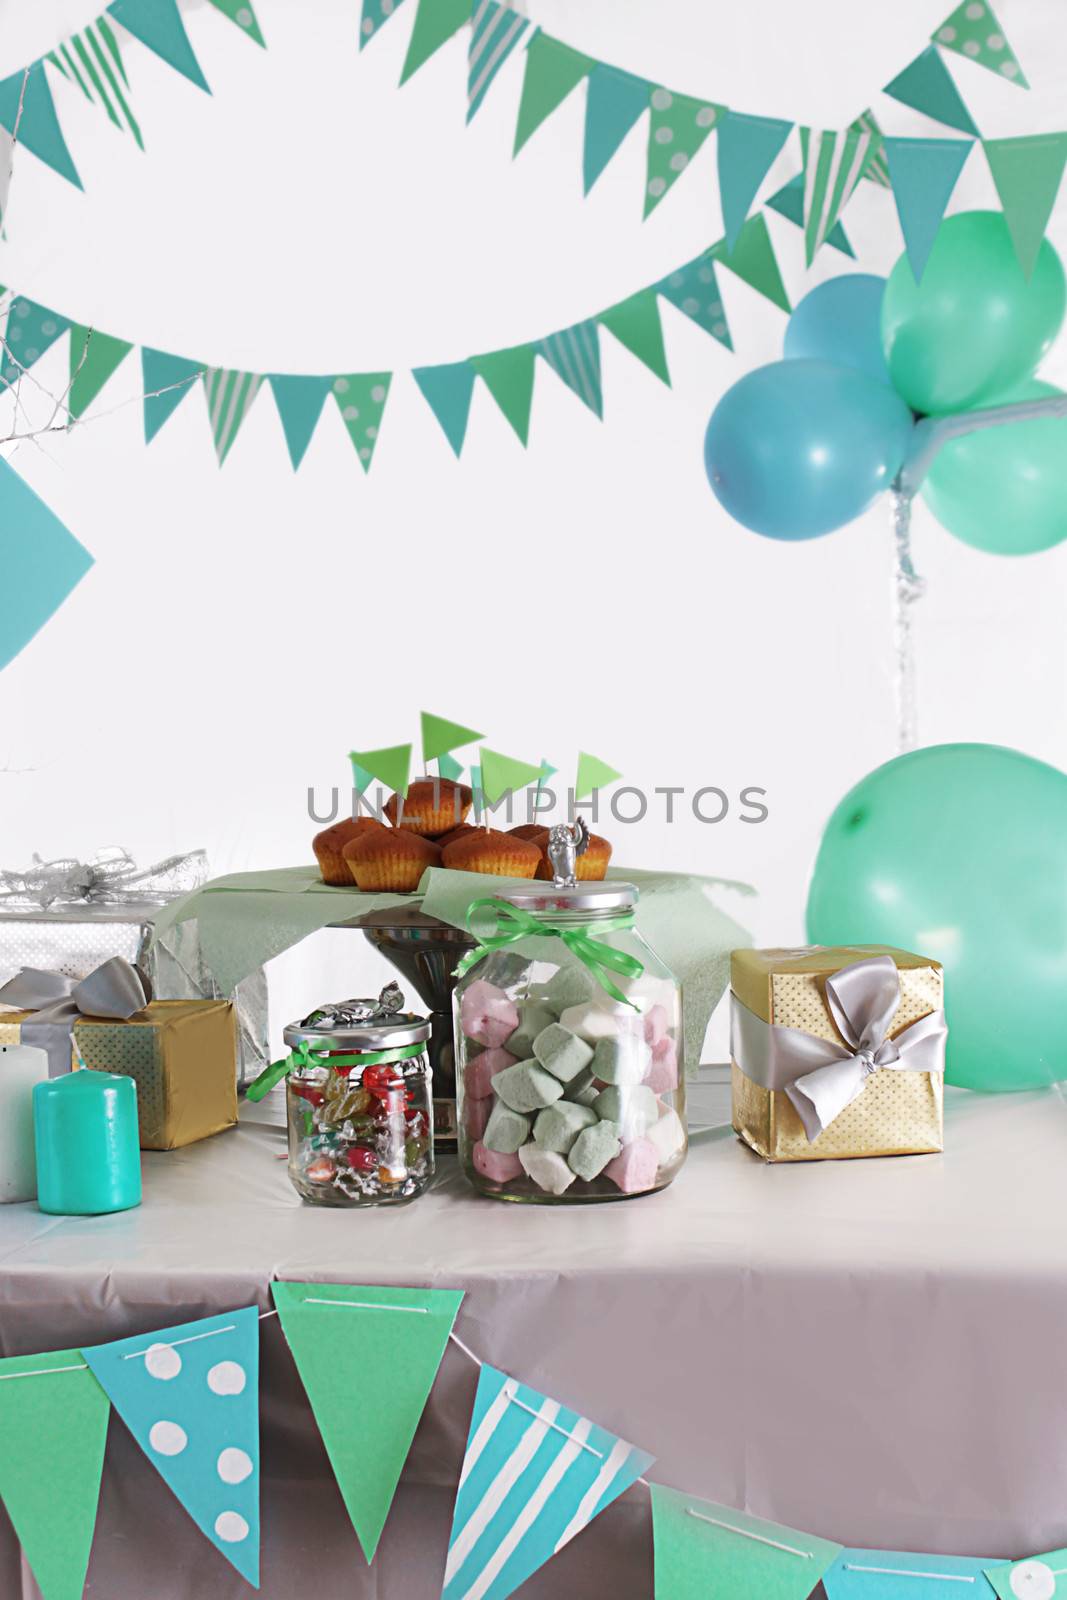 Blue and green colored birthday party table with sweets and decorations